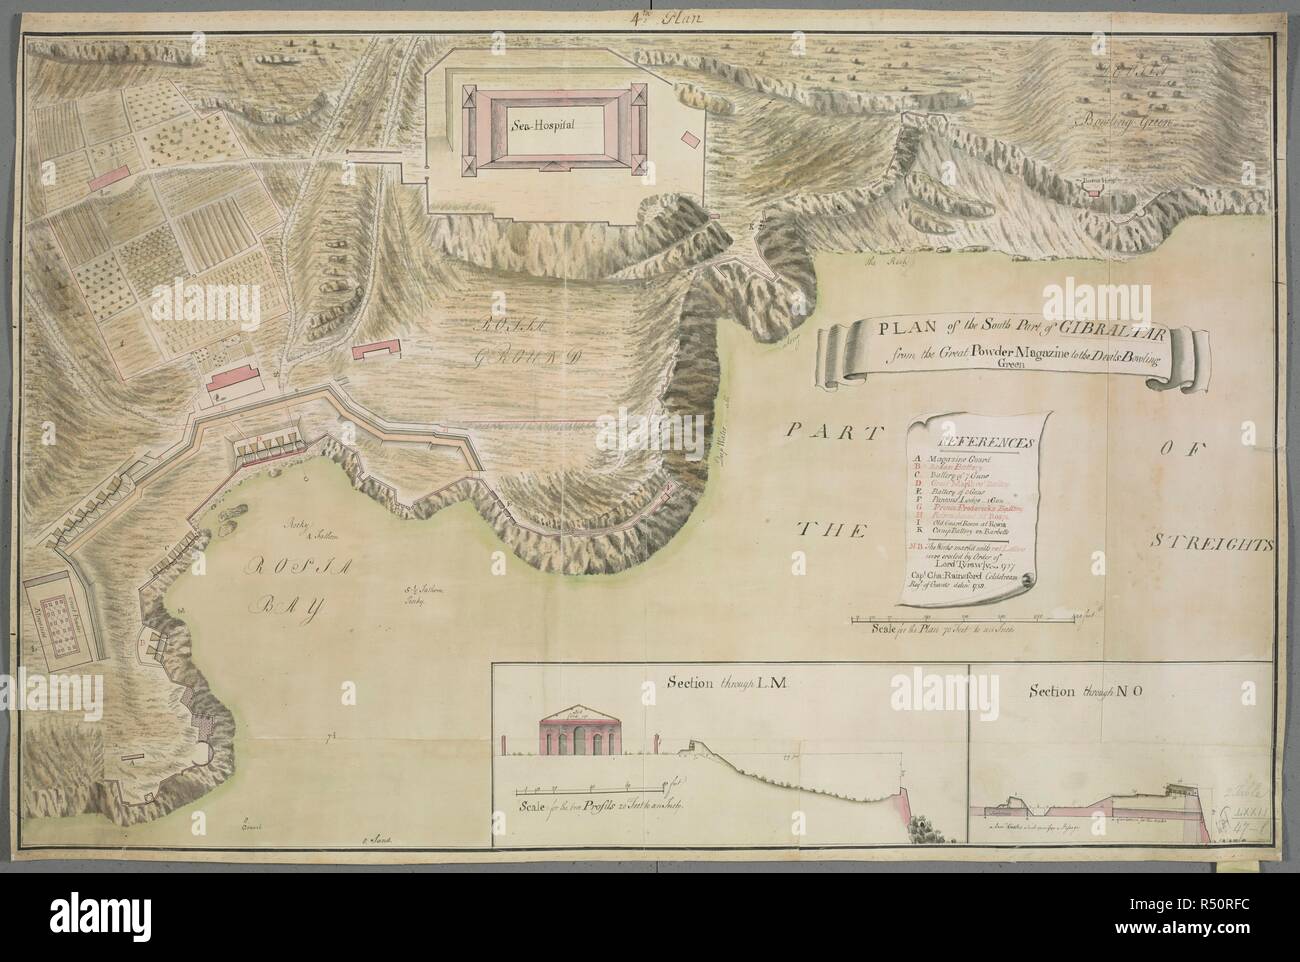 A plan of the South Part of Gibraltar. PLAN of the South Part of GIBRALTAR from the Great Powder Magazine to the Devils Bowling Green. [Gibraltar] : Capt: Cha: Rainsford Coldstream Regt: of Guards delint: 1758., [1758.]. Source: Maps K.Top.72.47.l.2.TAB. Language: English. Stock Photo